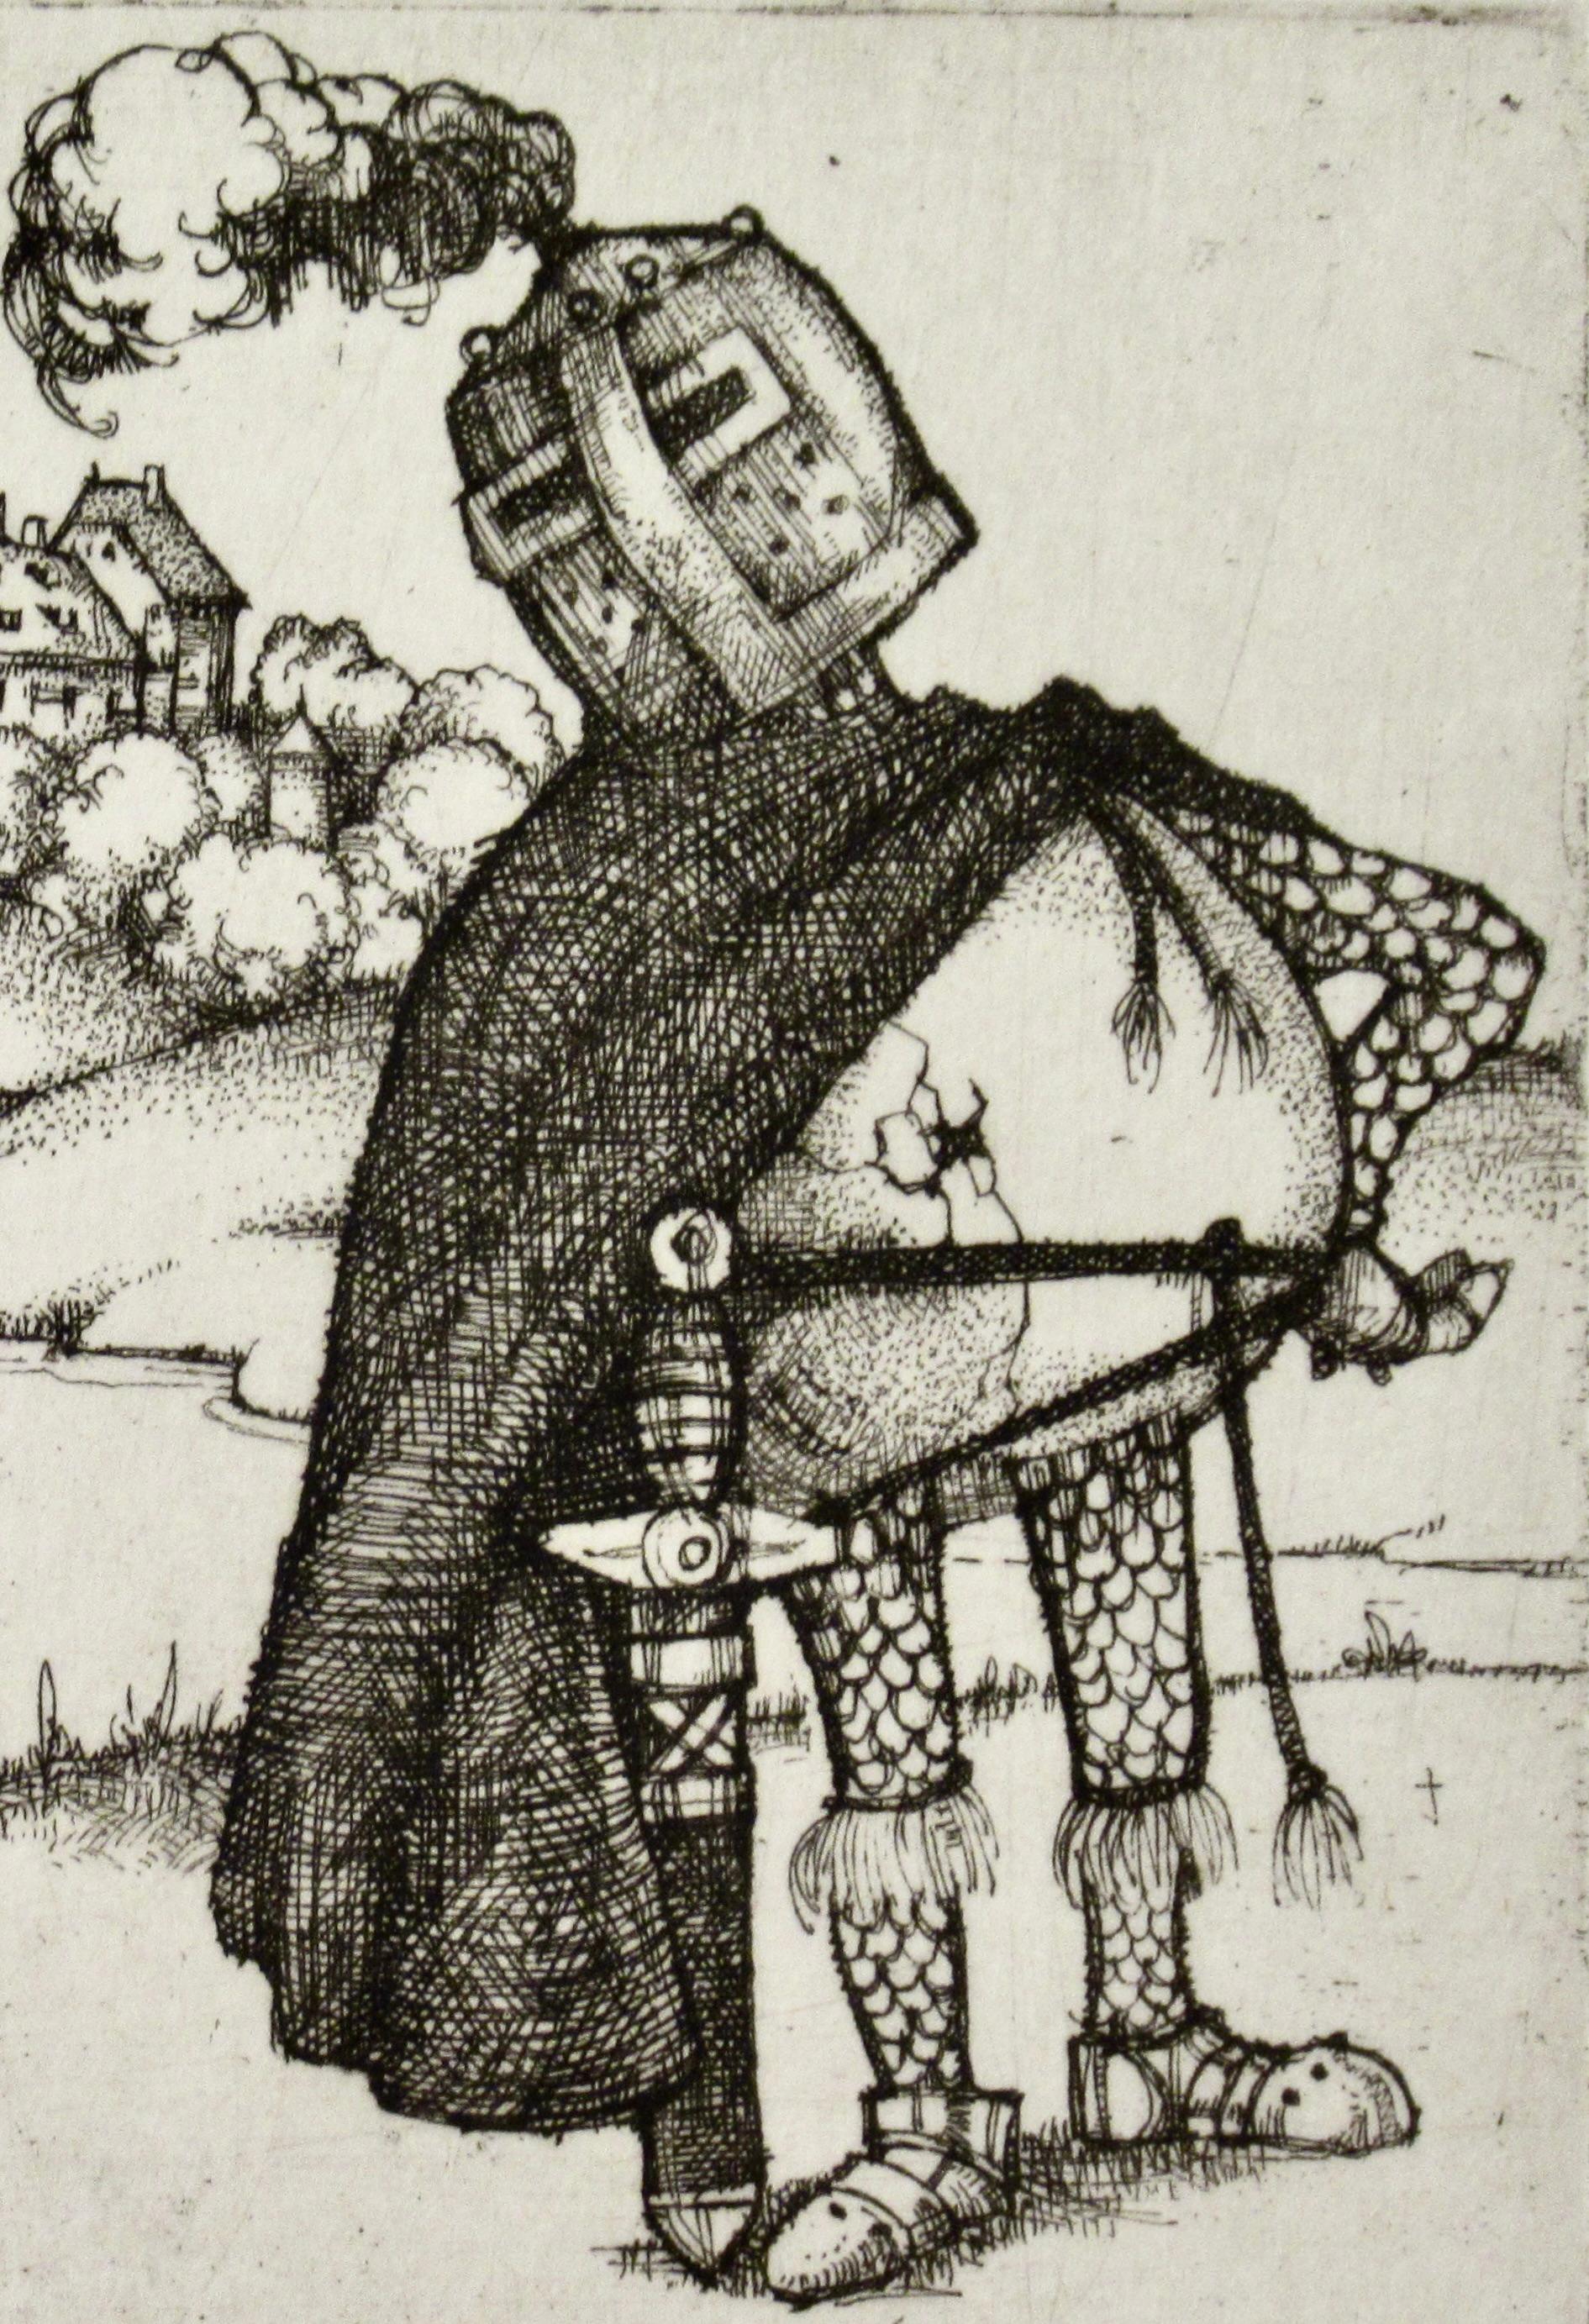 Knight Looking at a Girl - Other Art Style Print by Charles Bragg